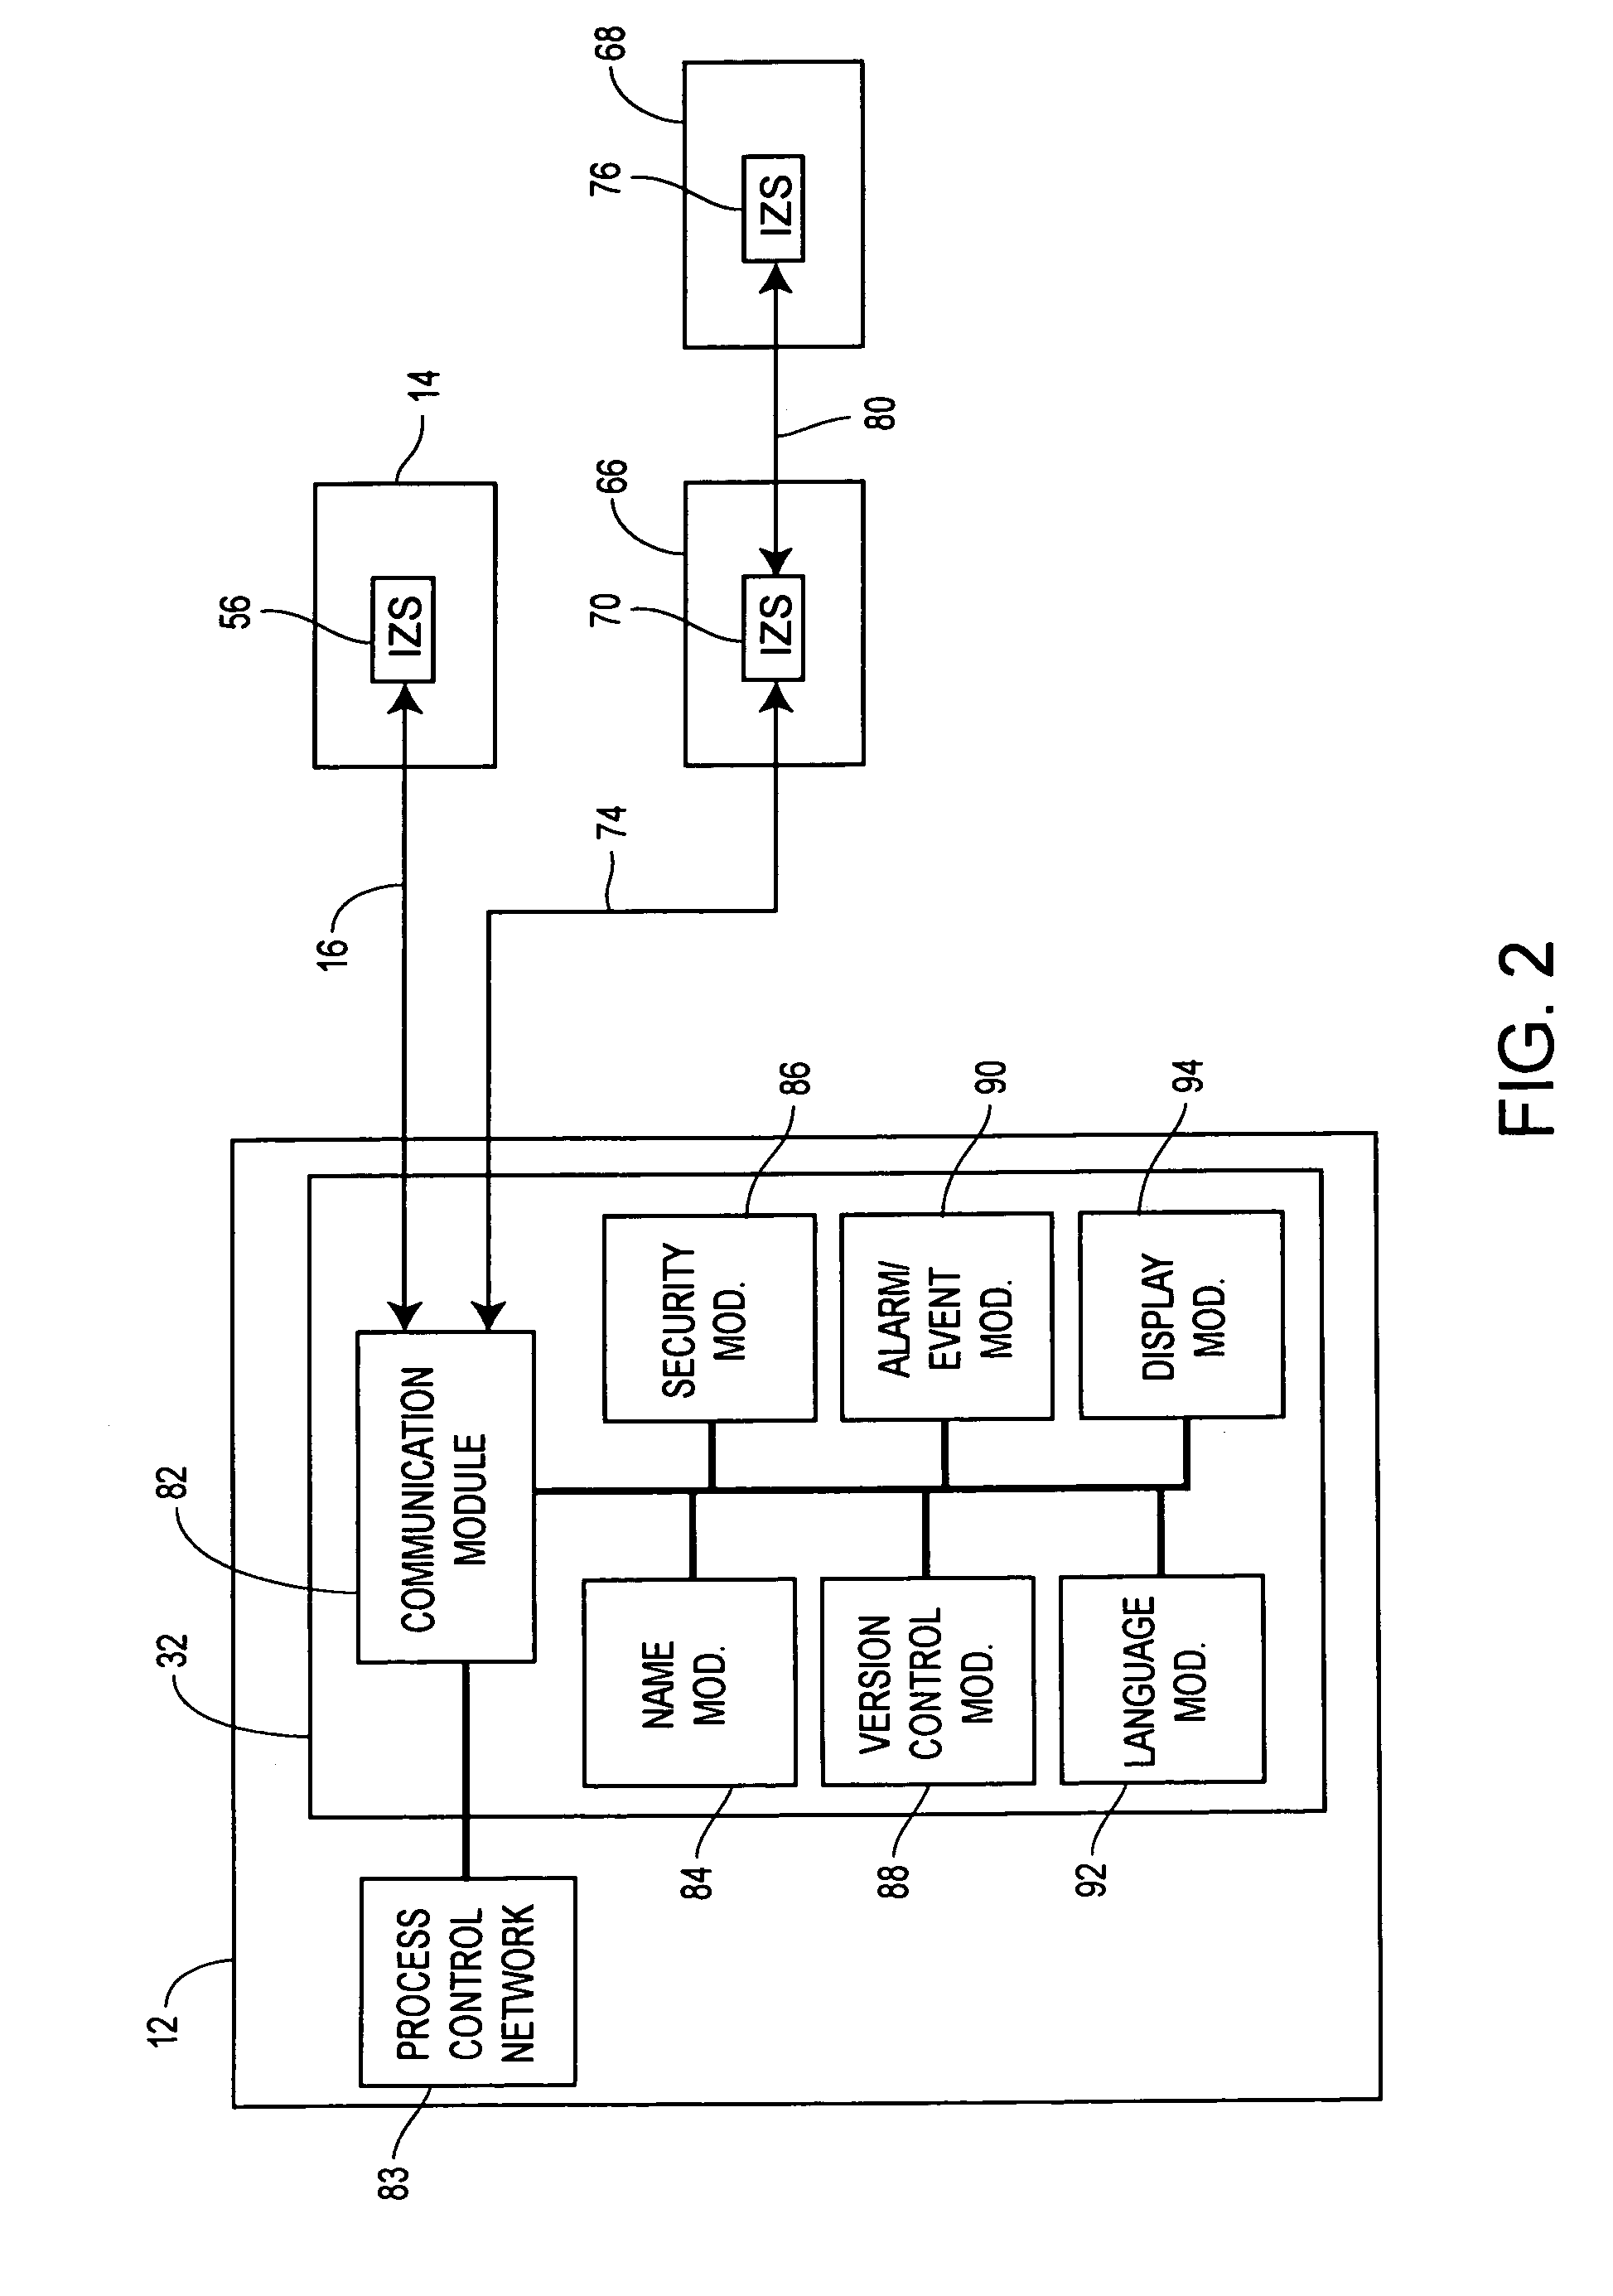 Interconnected zones within a process control system